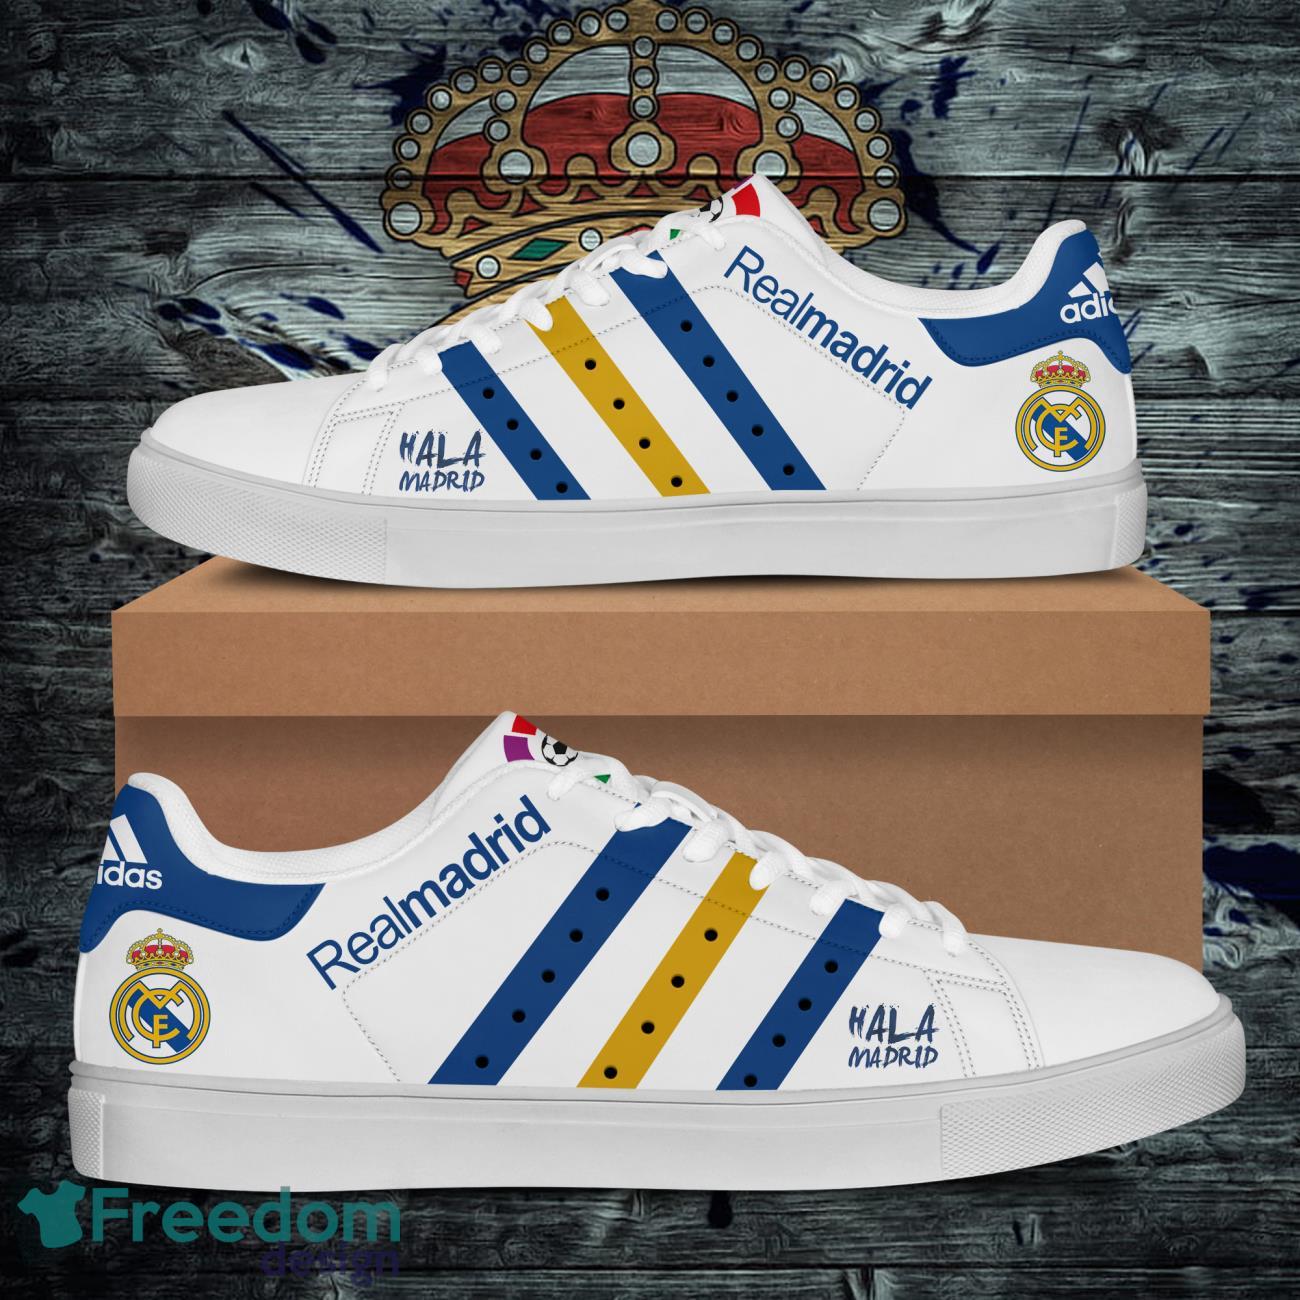 Real madrid Skate Stan Smith Shoes Product Photo 1